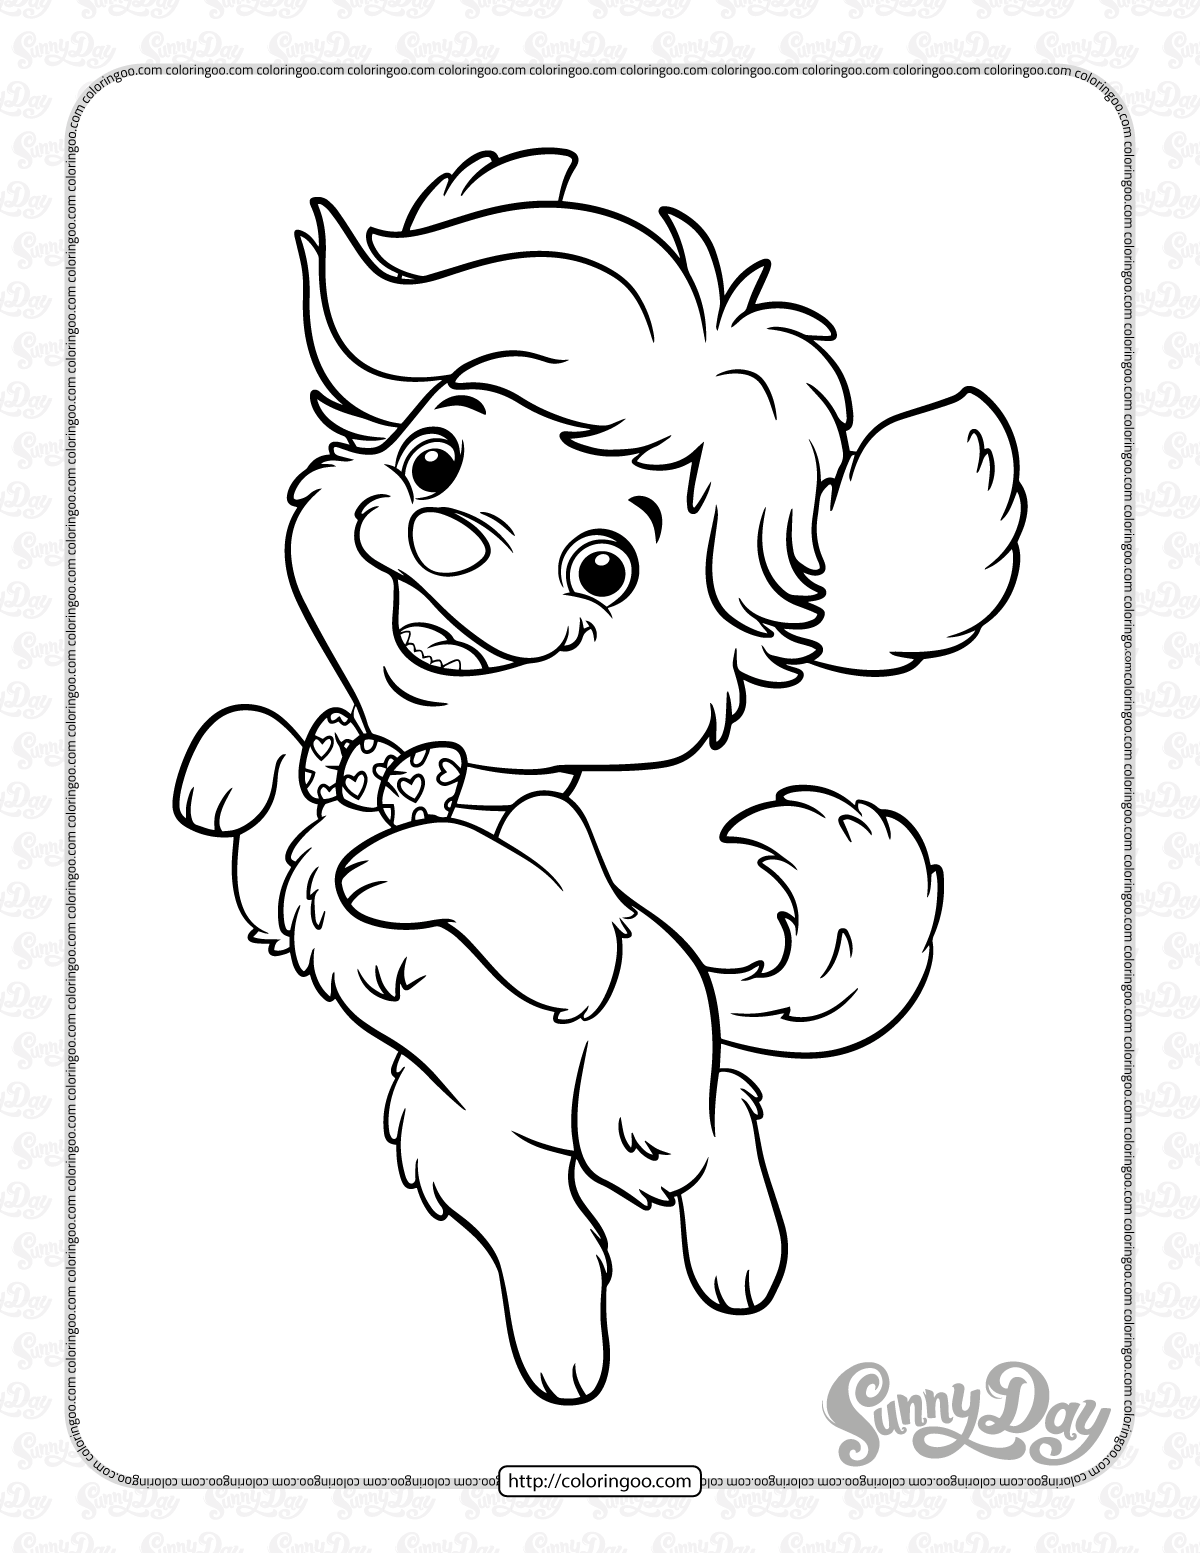 sunny day talking puppy doodle coloring pages